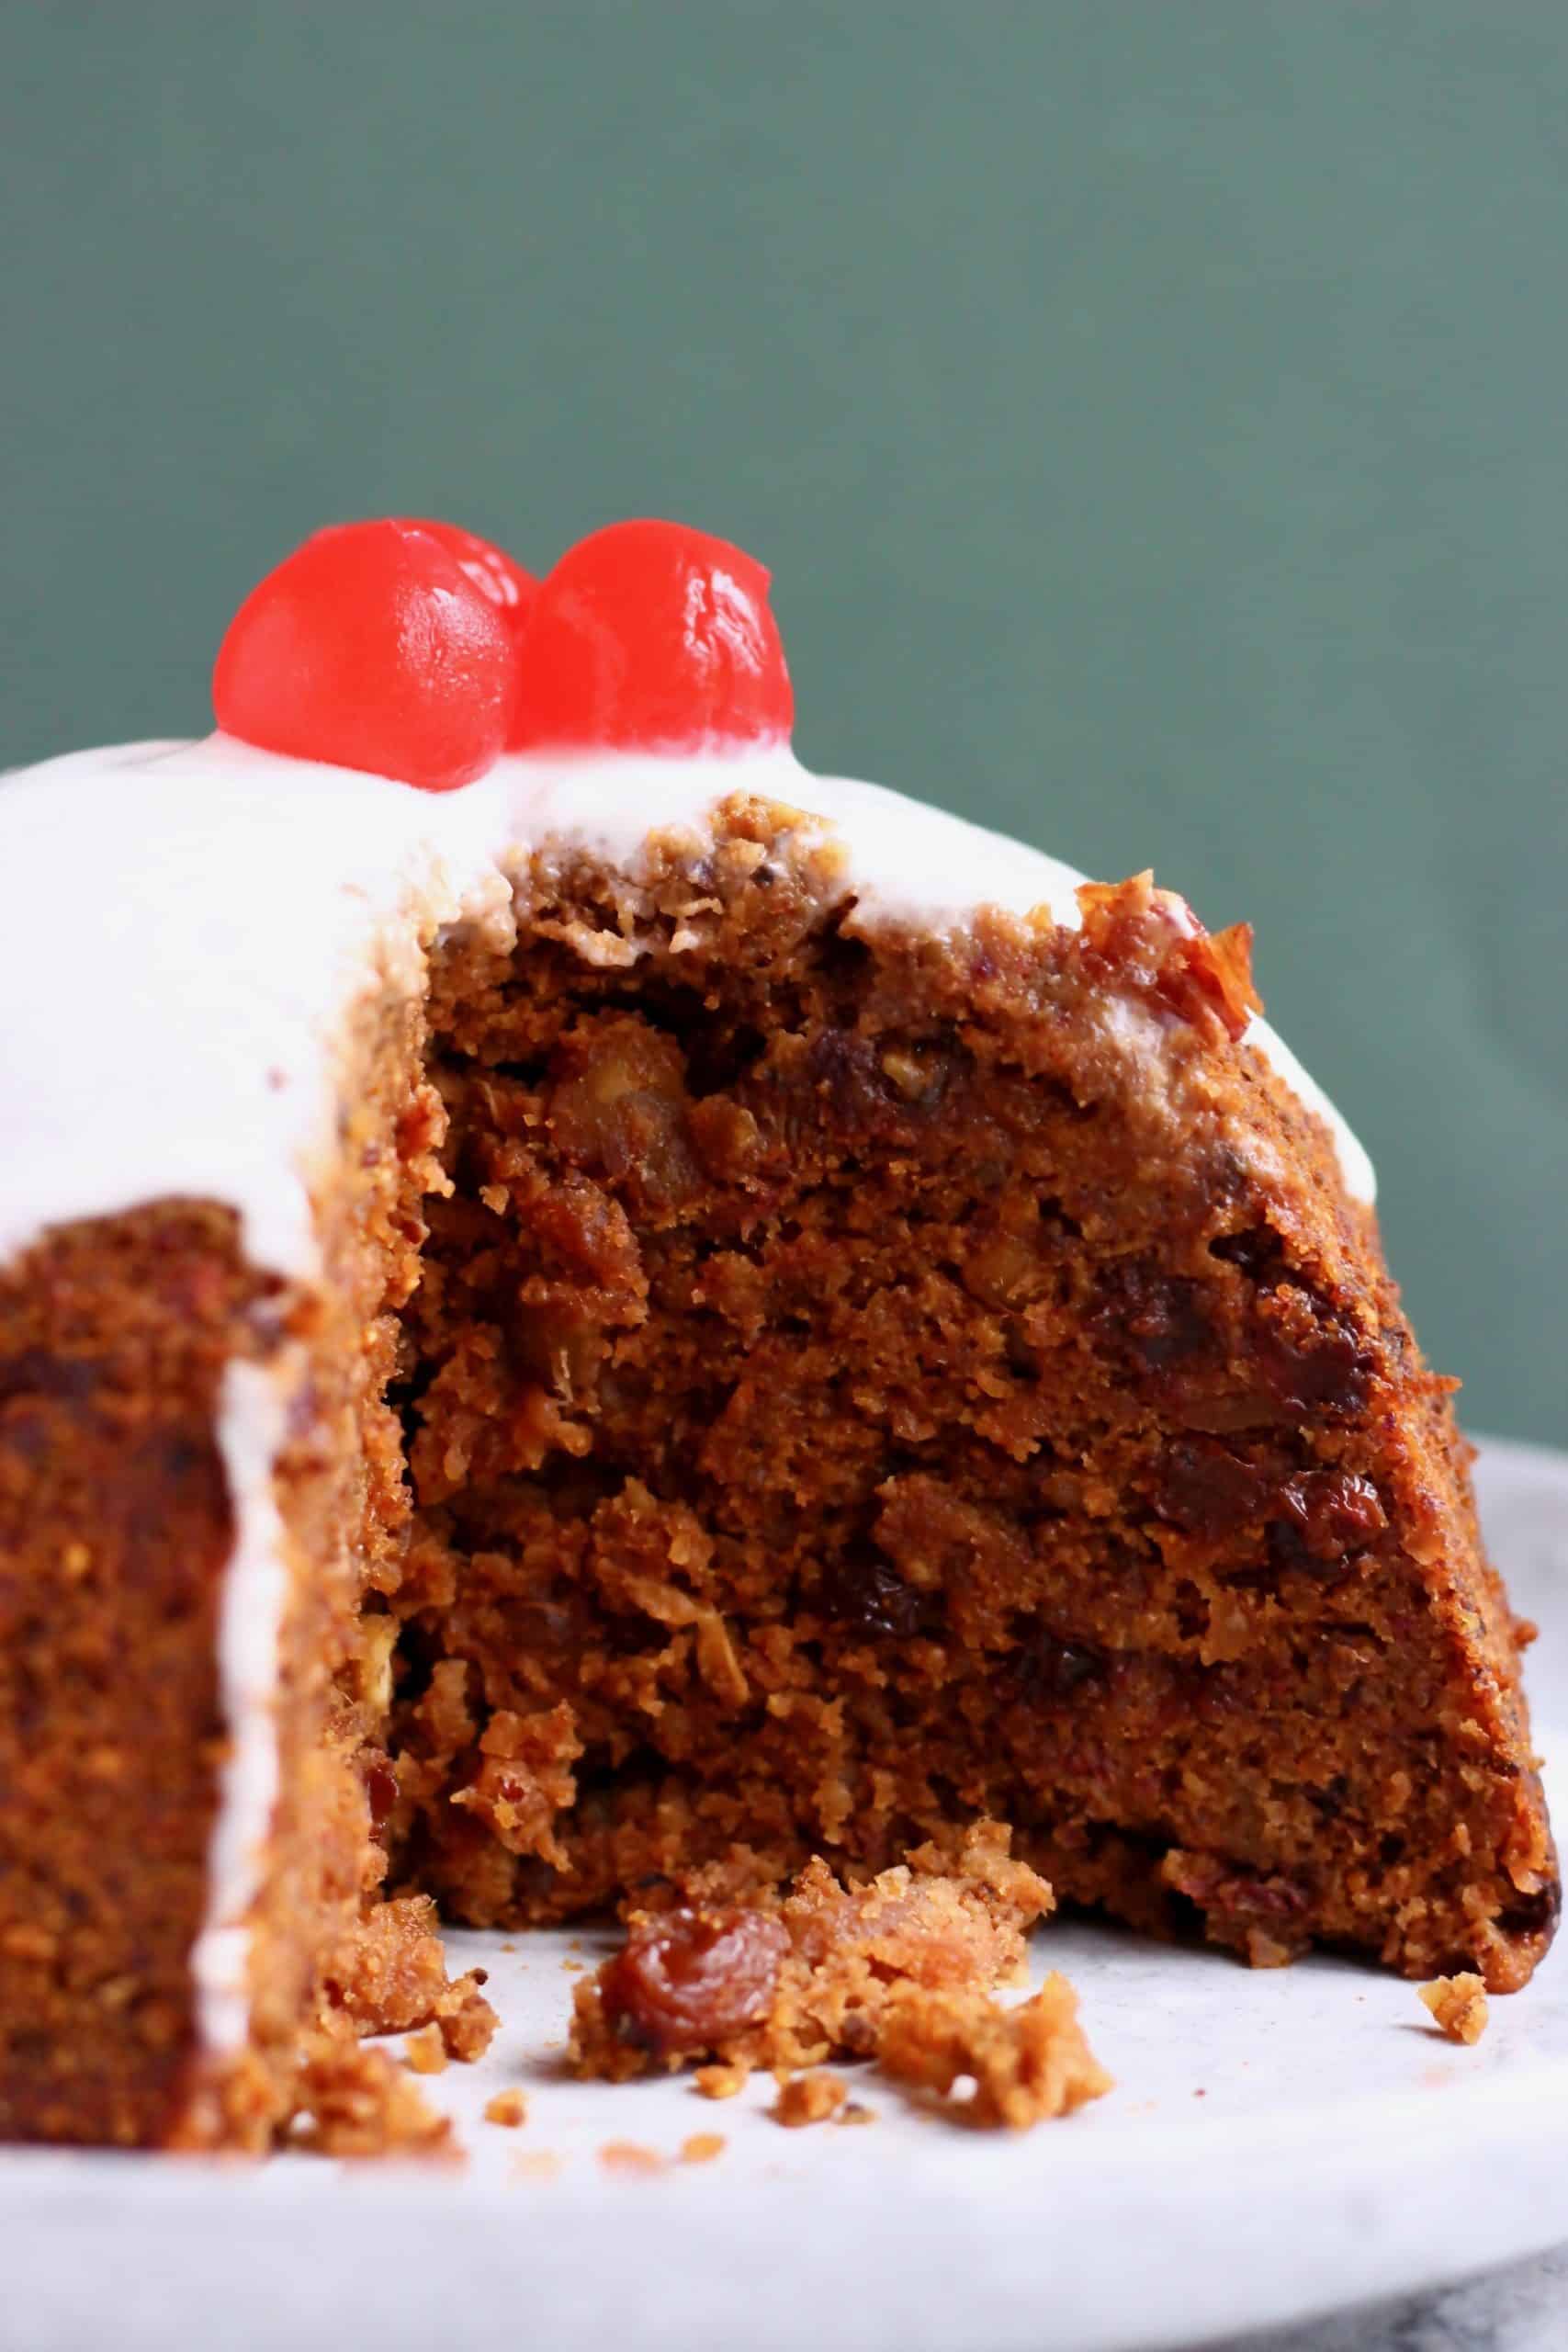 Christmas pudding with a slice cut out of it topped with cherries